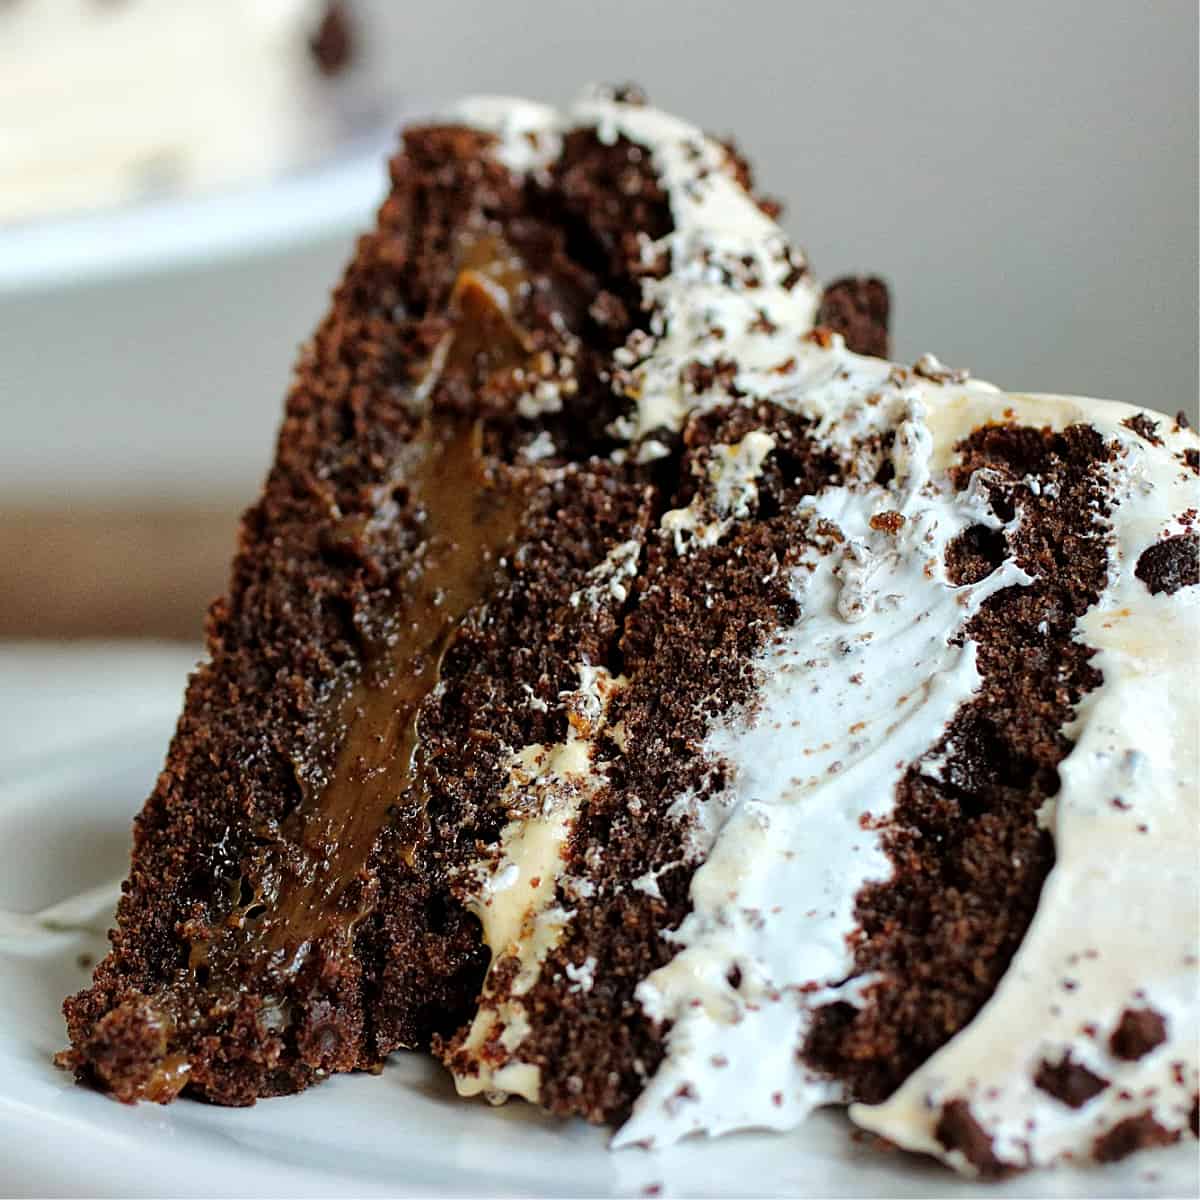 Close-up of chocolate layer cake filled with dulce de leche and meringue